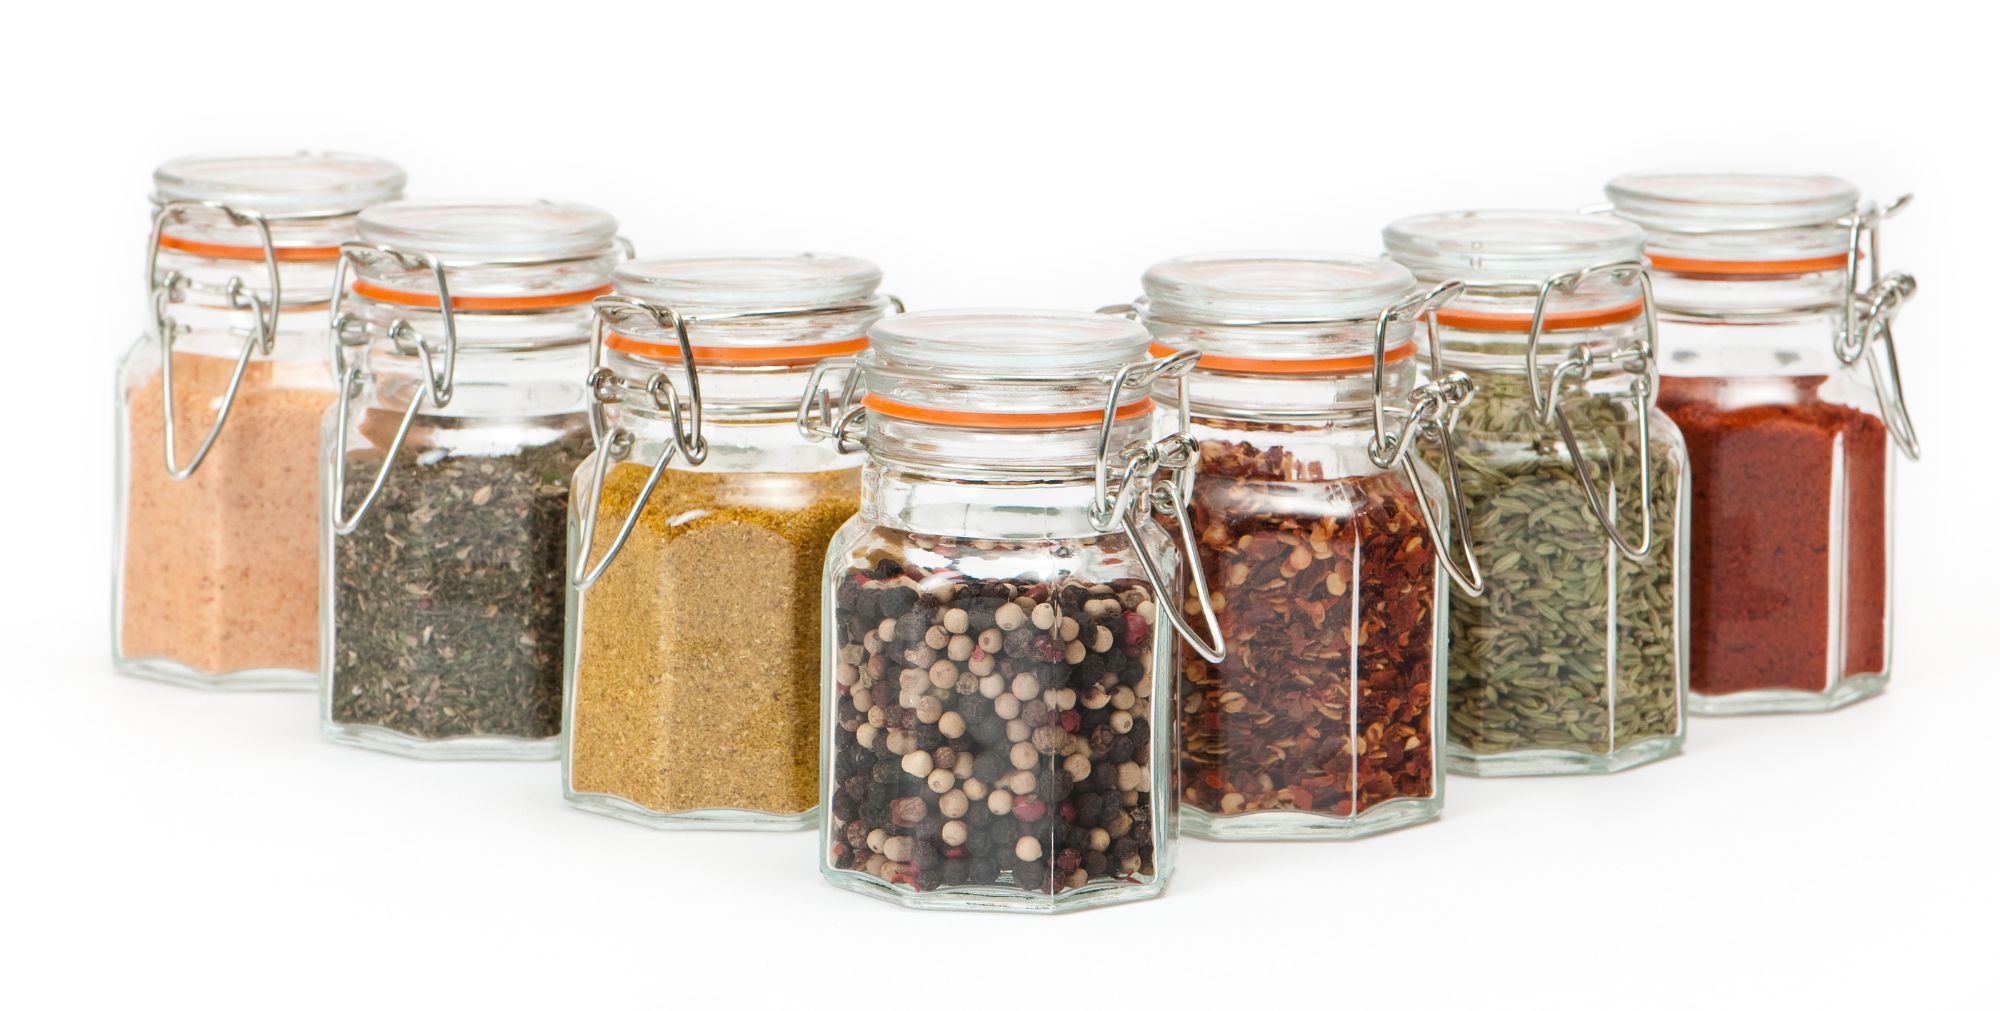 Spice bottles Application Knowledge